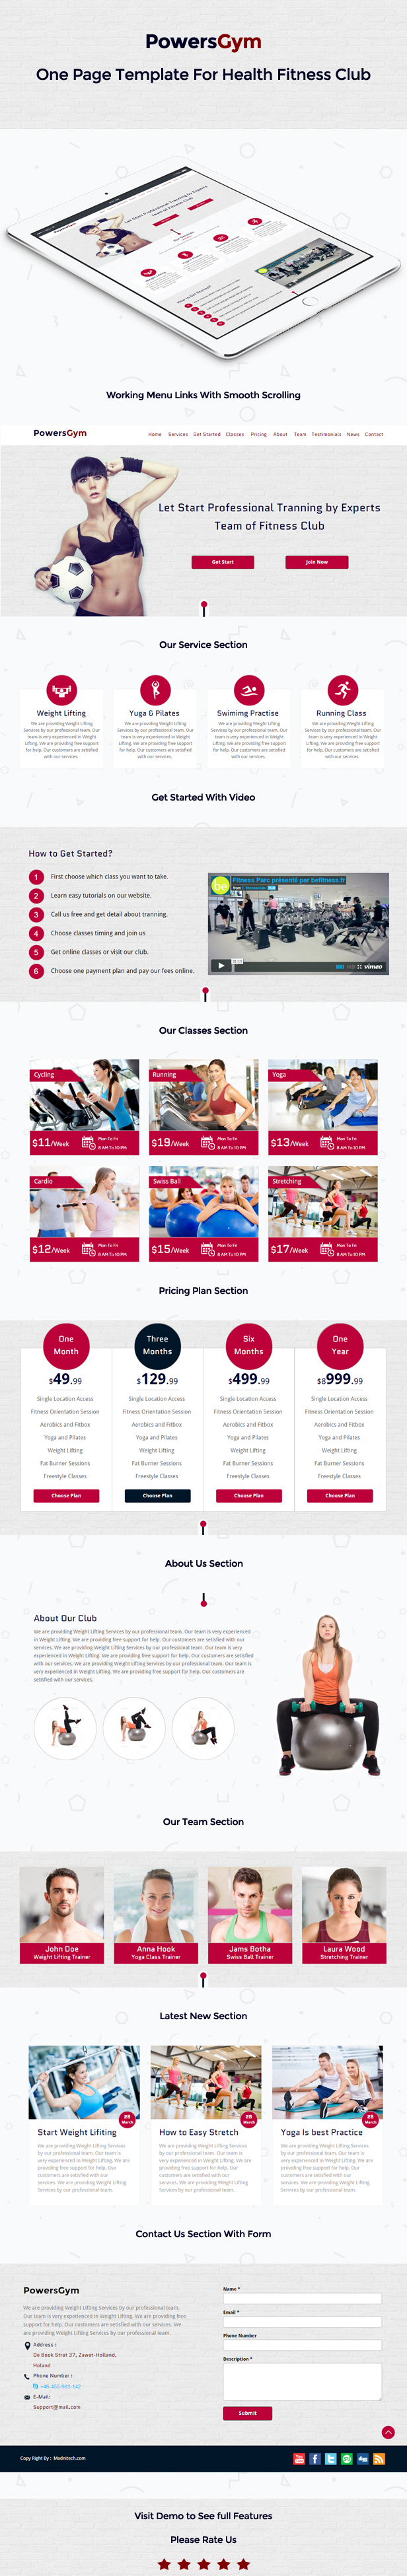 gym template PSD Design one page health fitness club youga Yoga running swimming latest design One Page Responsive yoga designs gym fitness